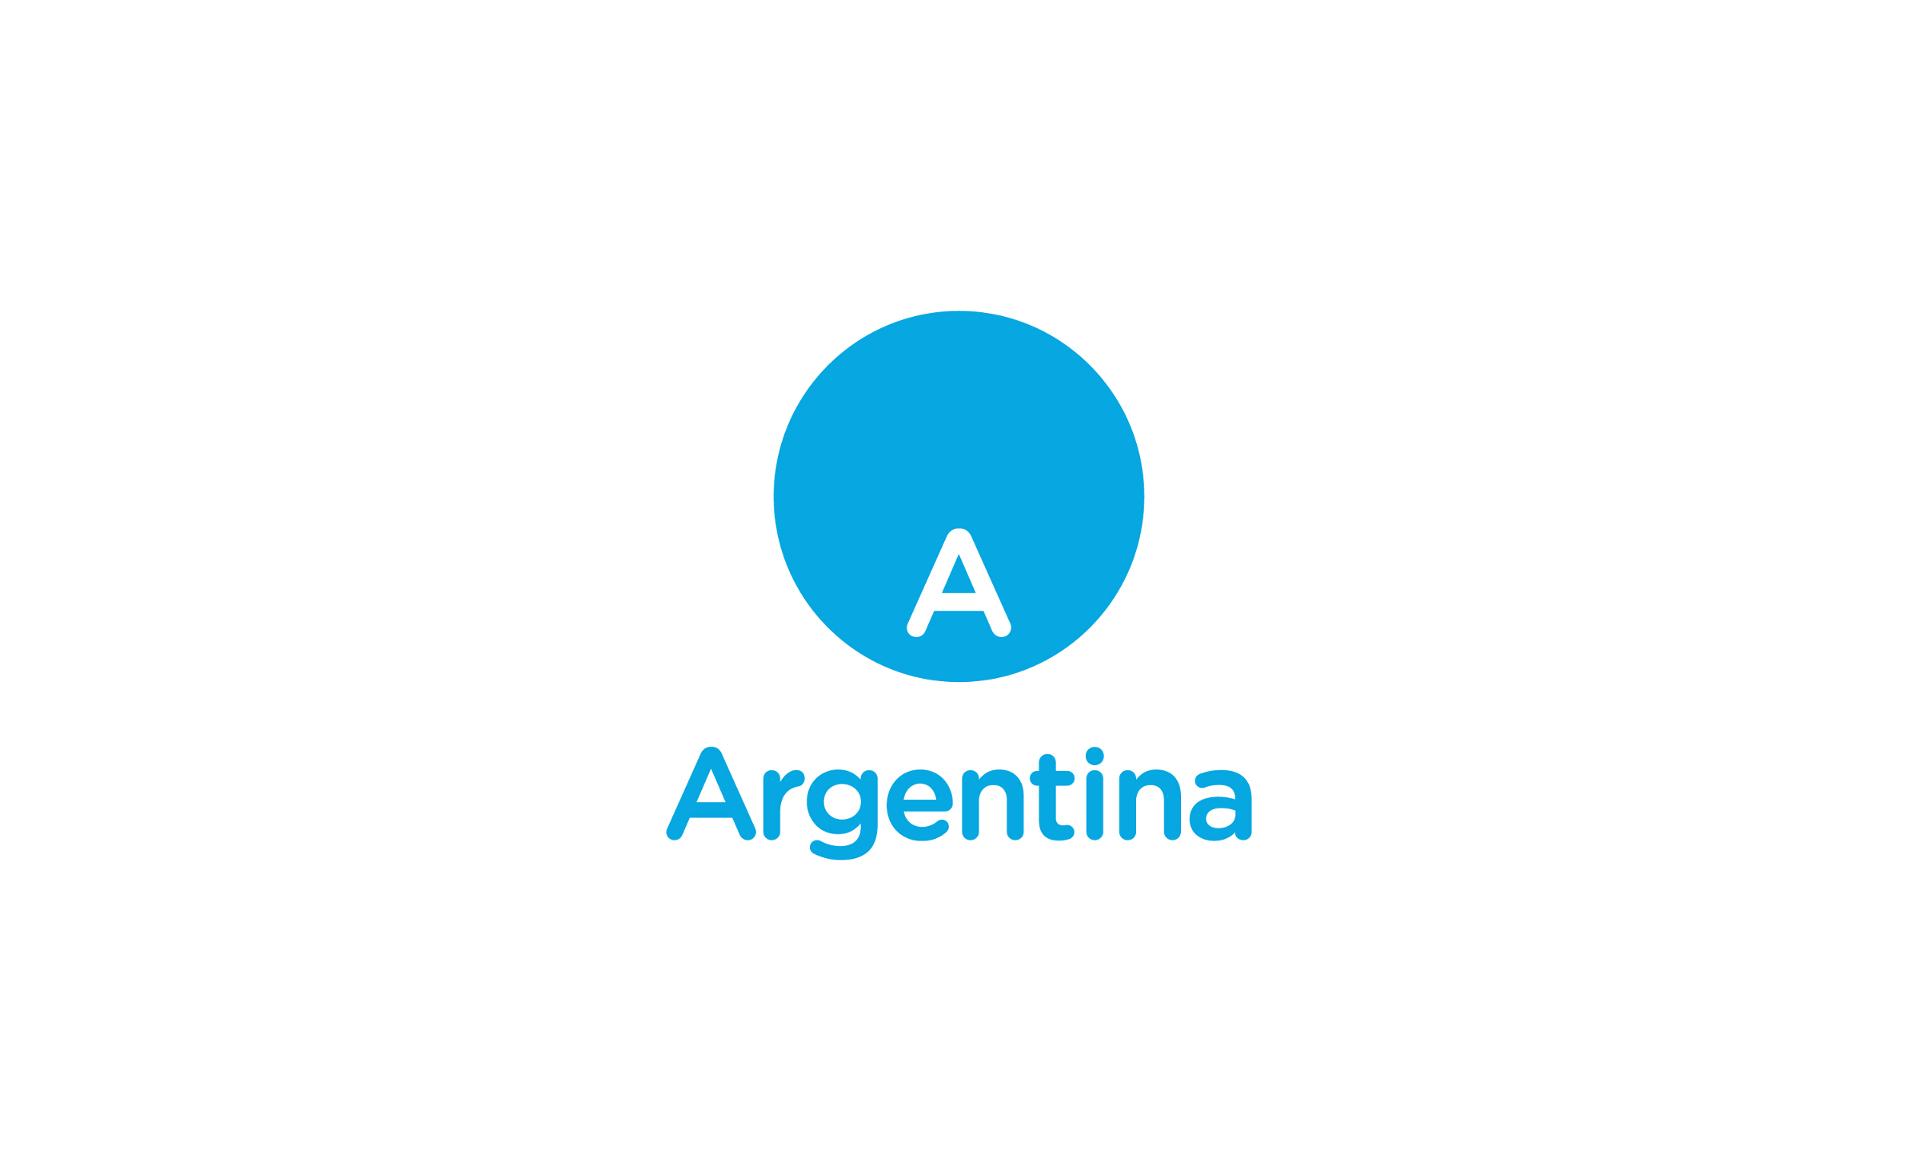 Argentina Logo - Argentina launches new country branding with a modern logo ...